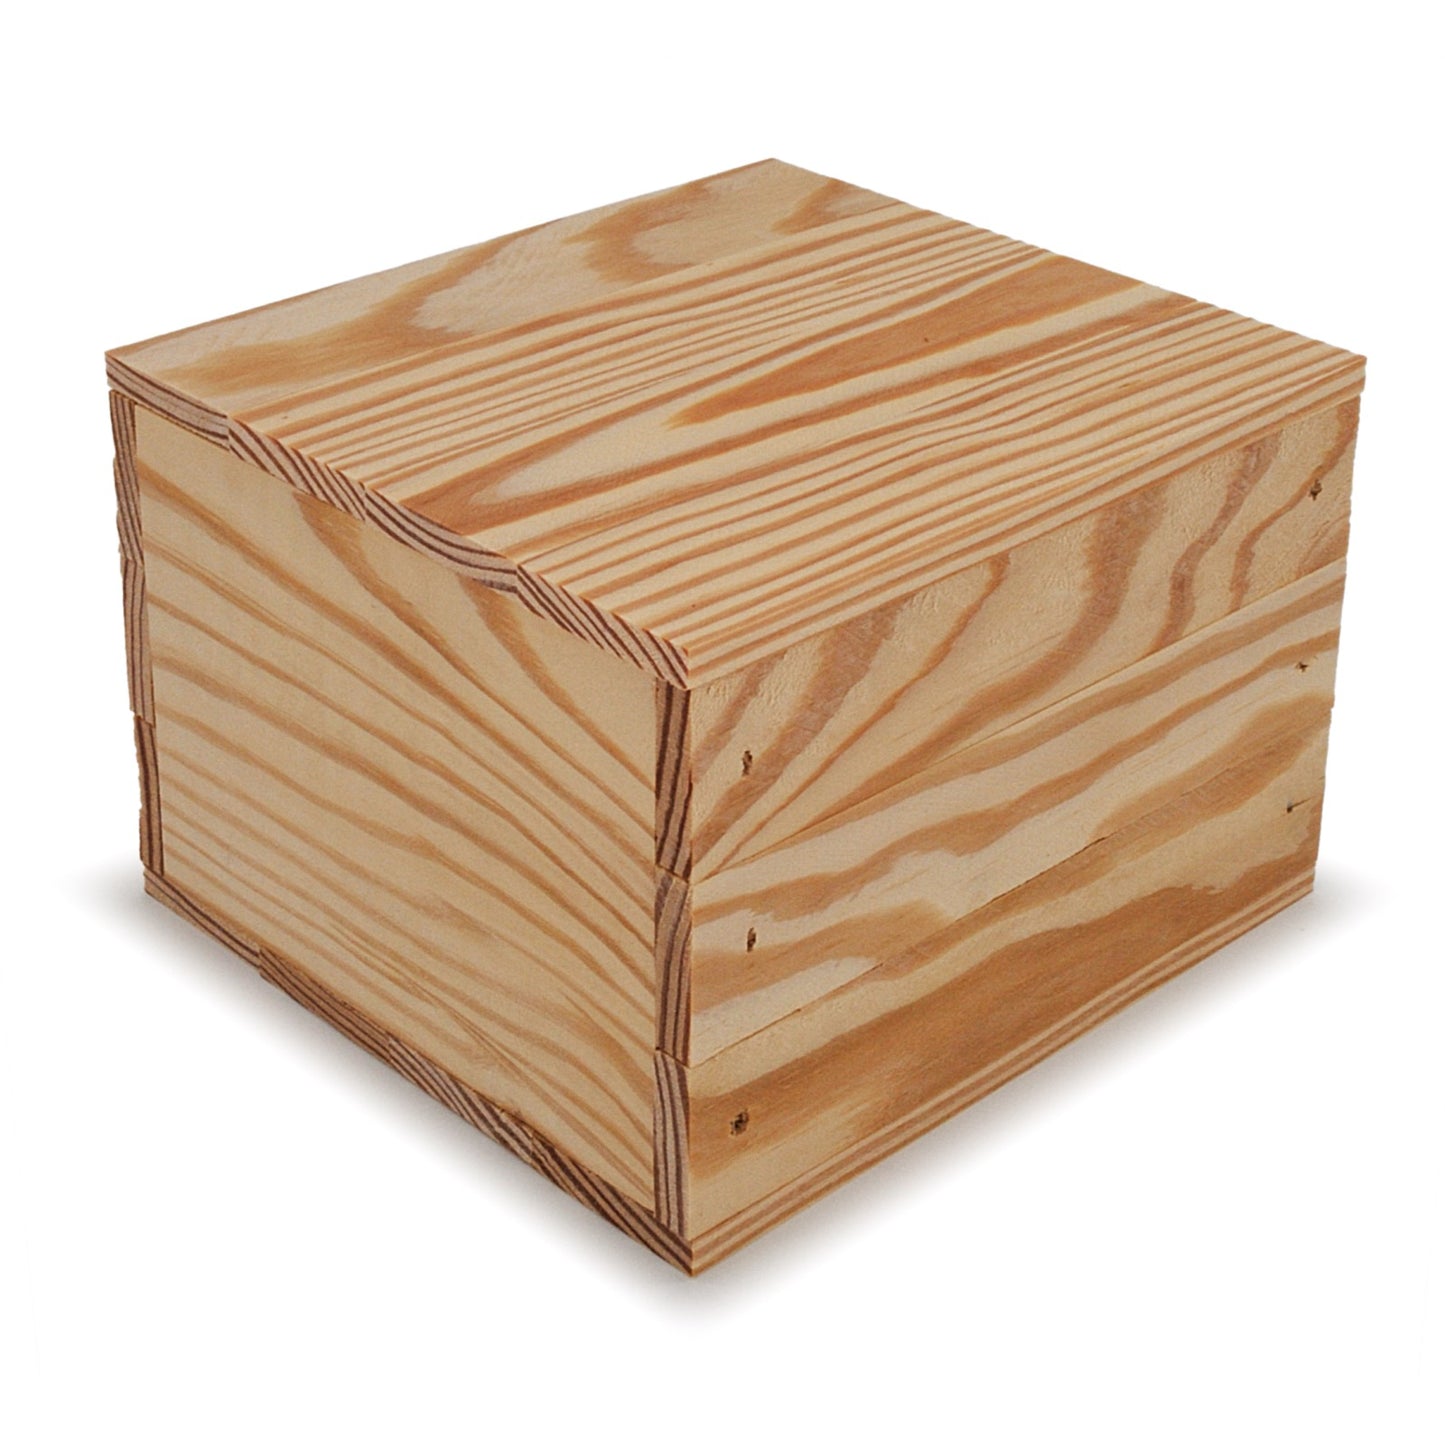 Small wooden crate with lid 6x6.25x5.25, 6-BX-6-6.25-5.25-NX-NW-LL, 12-BX-6-6.25-5.25-NX-NW-LL, 24-BX-6-6.25-5.25-NX-NW-LL, 48-BX-6-6.25-5.25-NX-NW-LL, 96-BX-6-6.25-5.25-NX-NW-LL